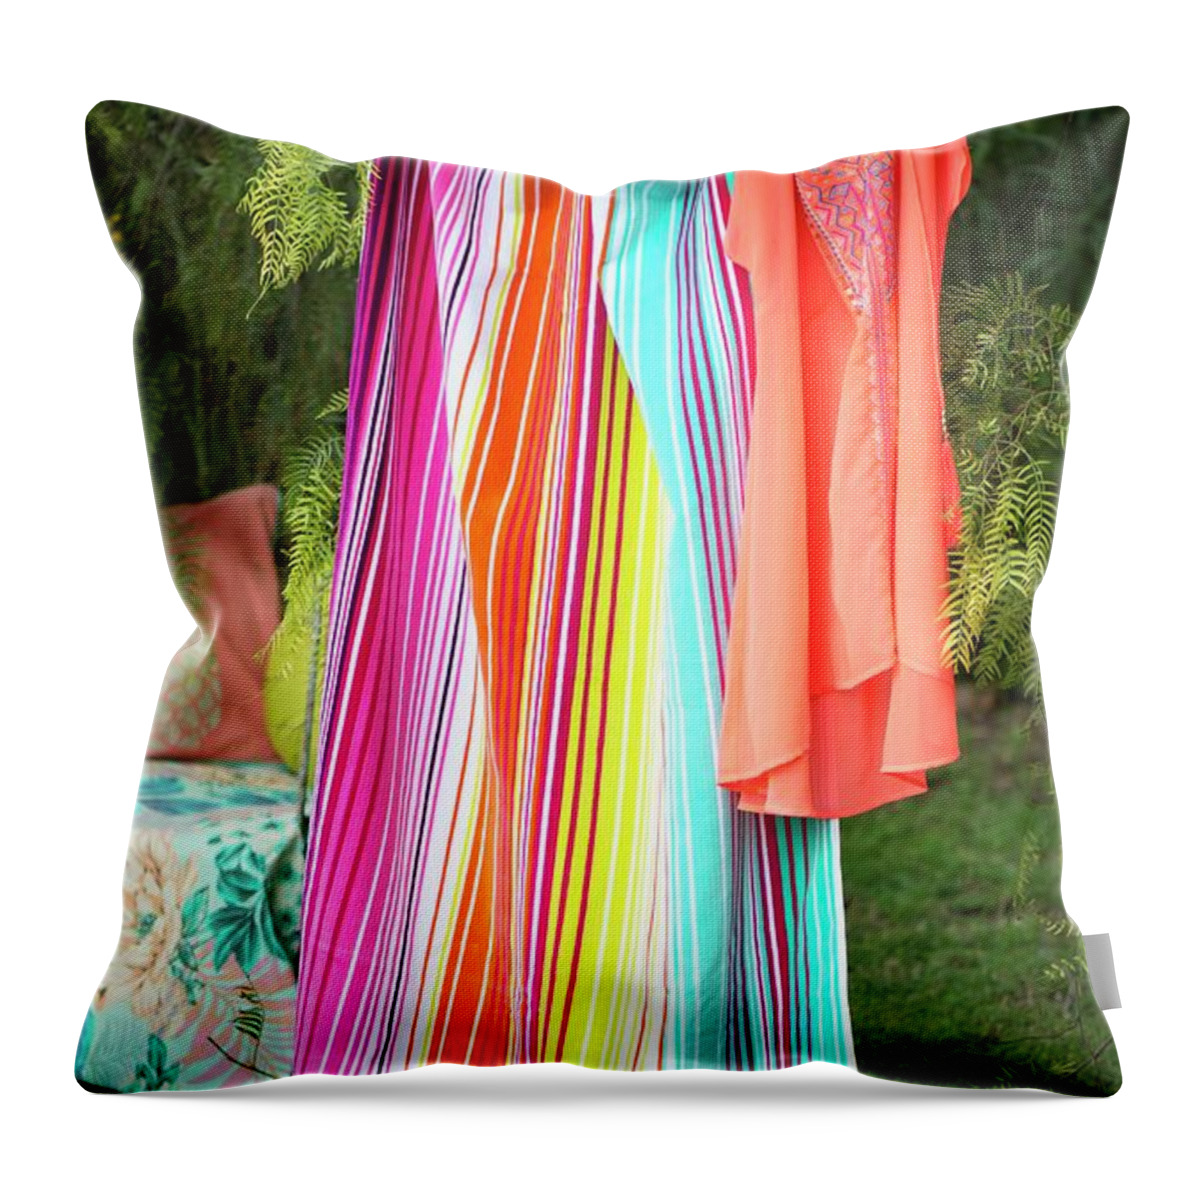 Ip_11507743 Throw Pillow featuring the photograph Tunic And Striped Towel Hung From Washing Line In Garden by Winfried Heinze